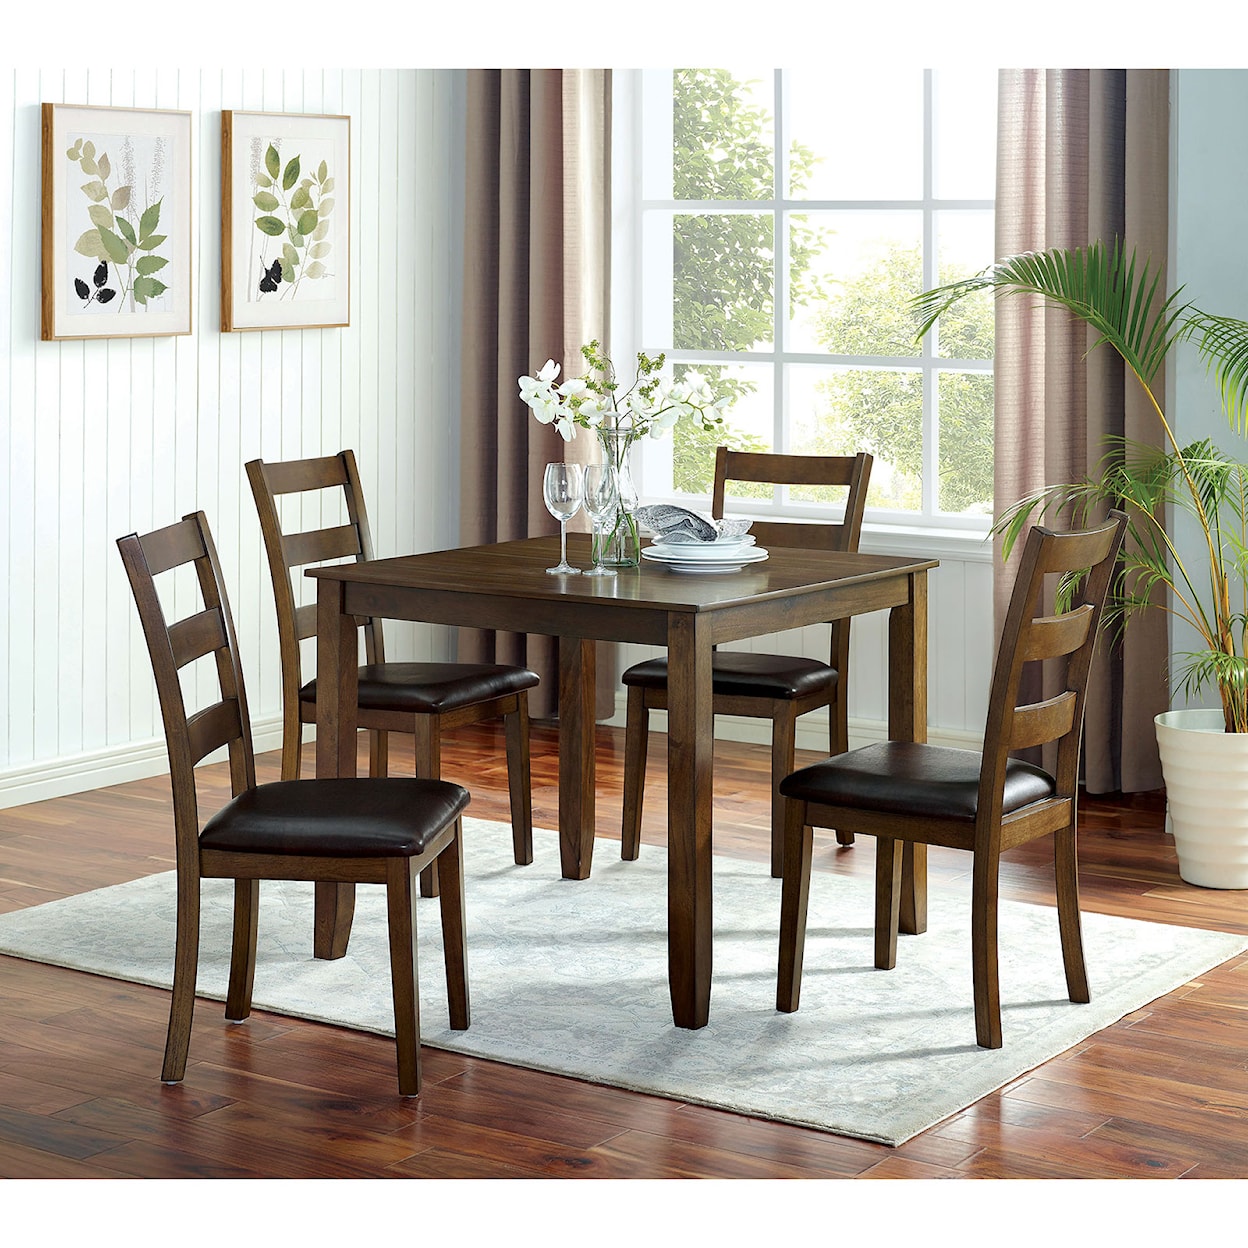 FUSA Gracefield 5 Pc. Dining Table Set